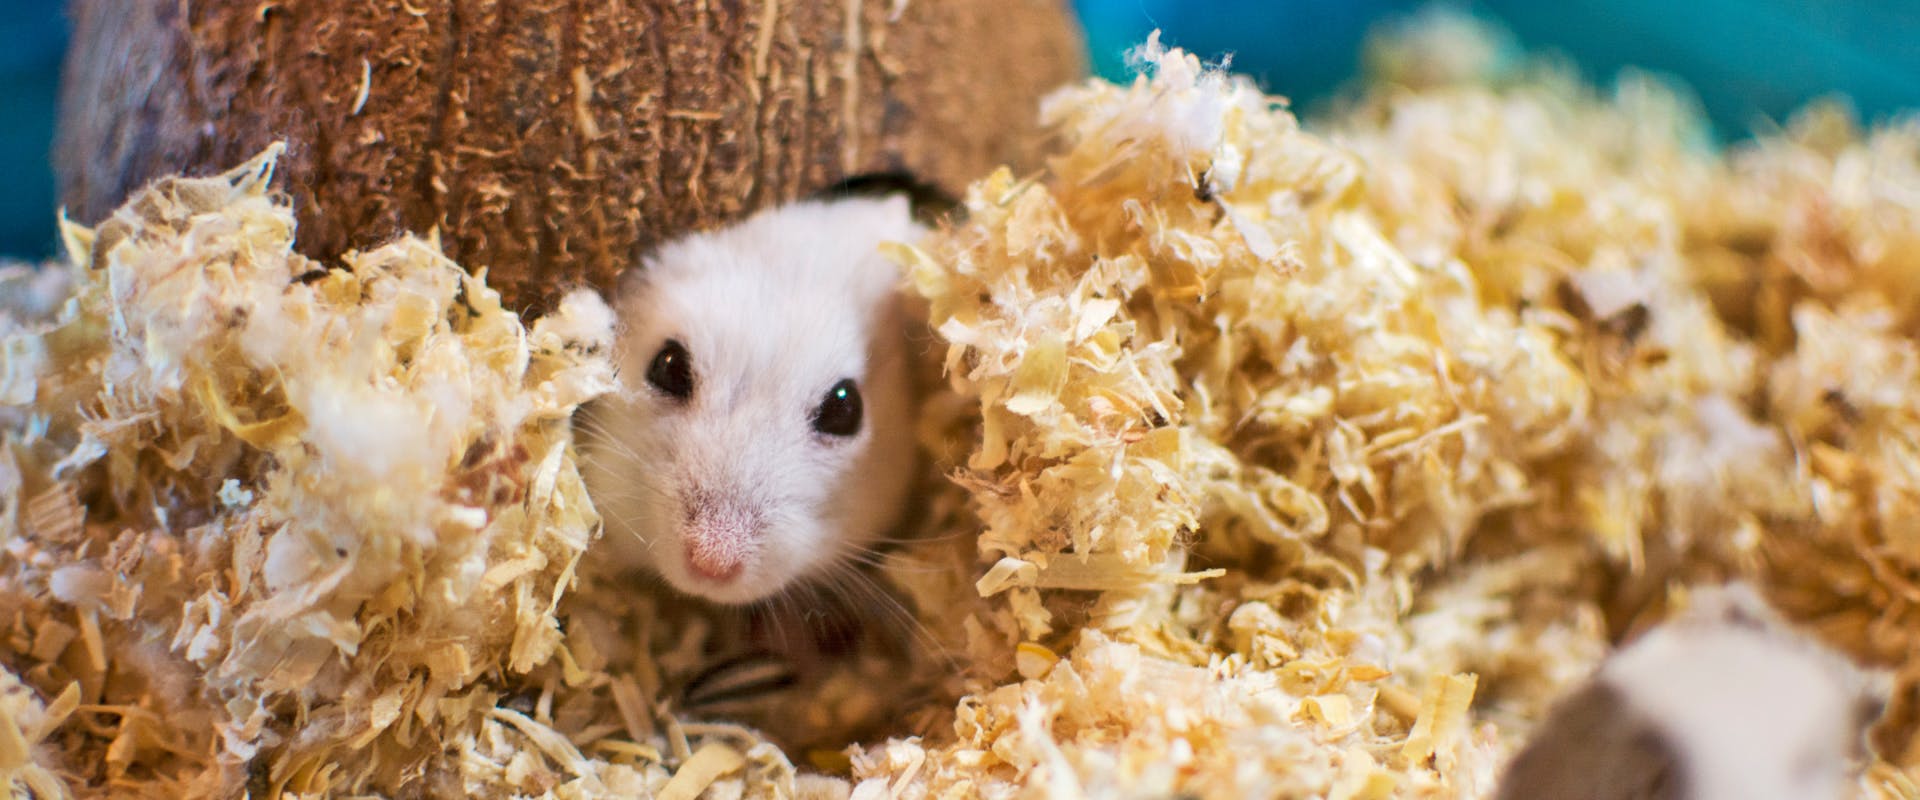 a white hamster poking its face out from under a coconut house surrounded by sawdust